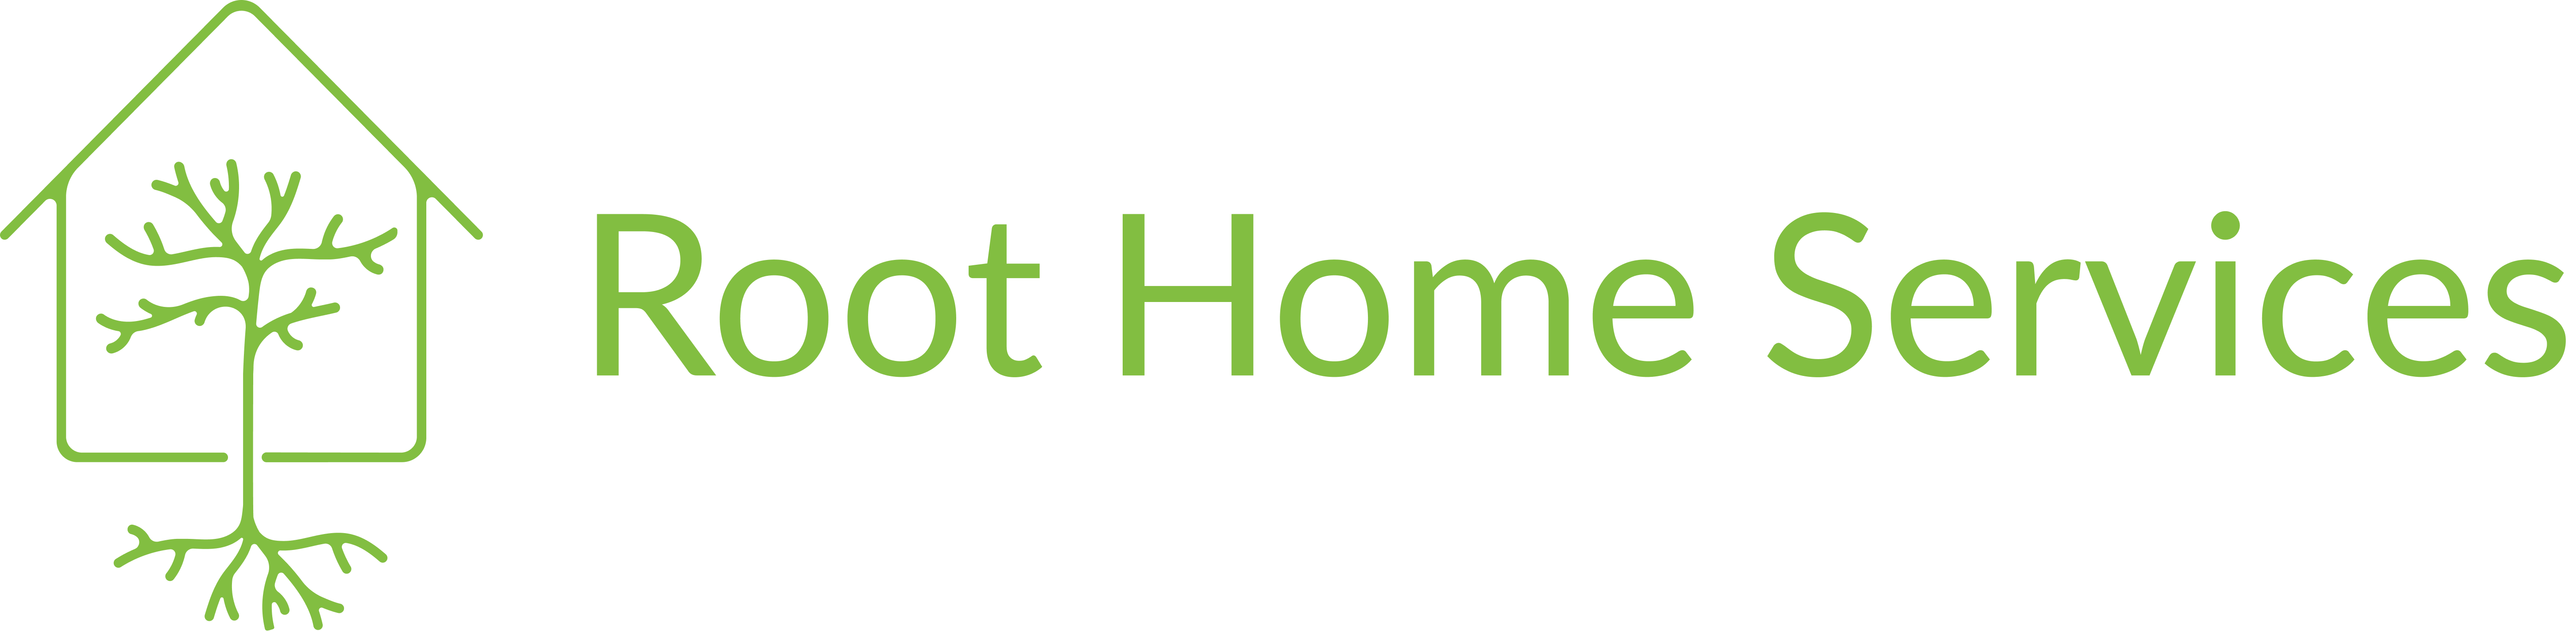 Root Home Services Logo